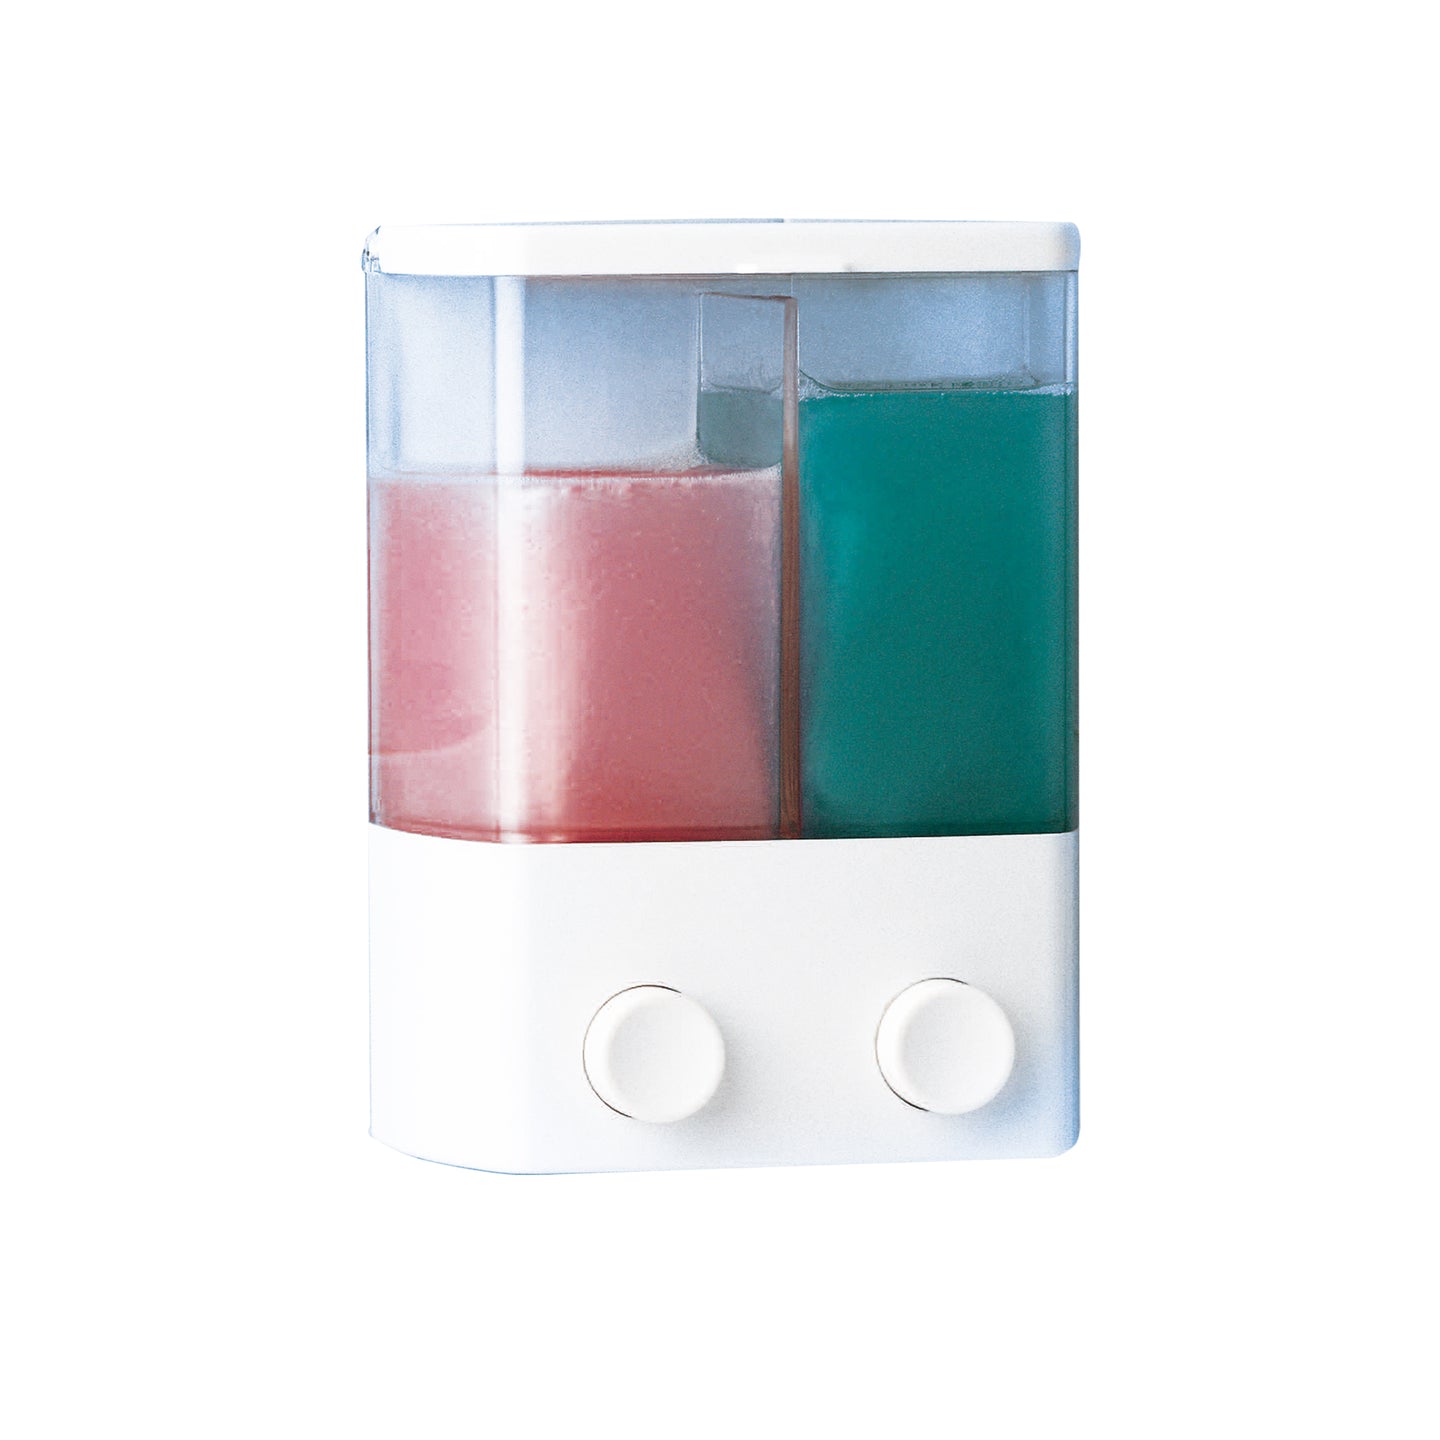 Rayen High Quality Soap Dispenser With 2 Compartment